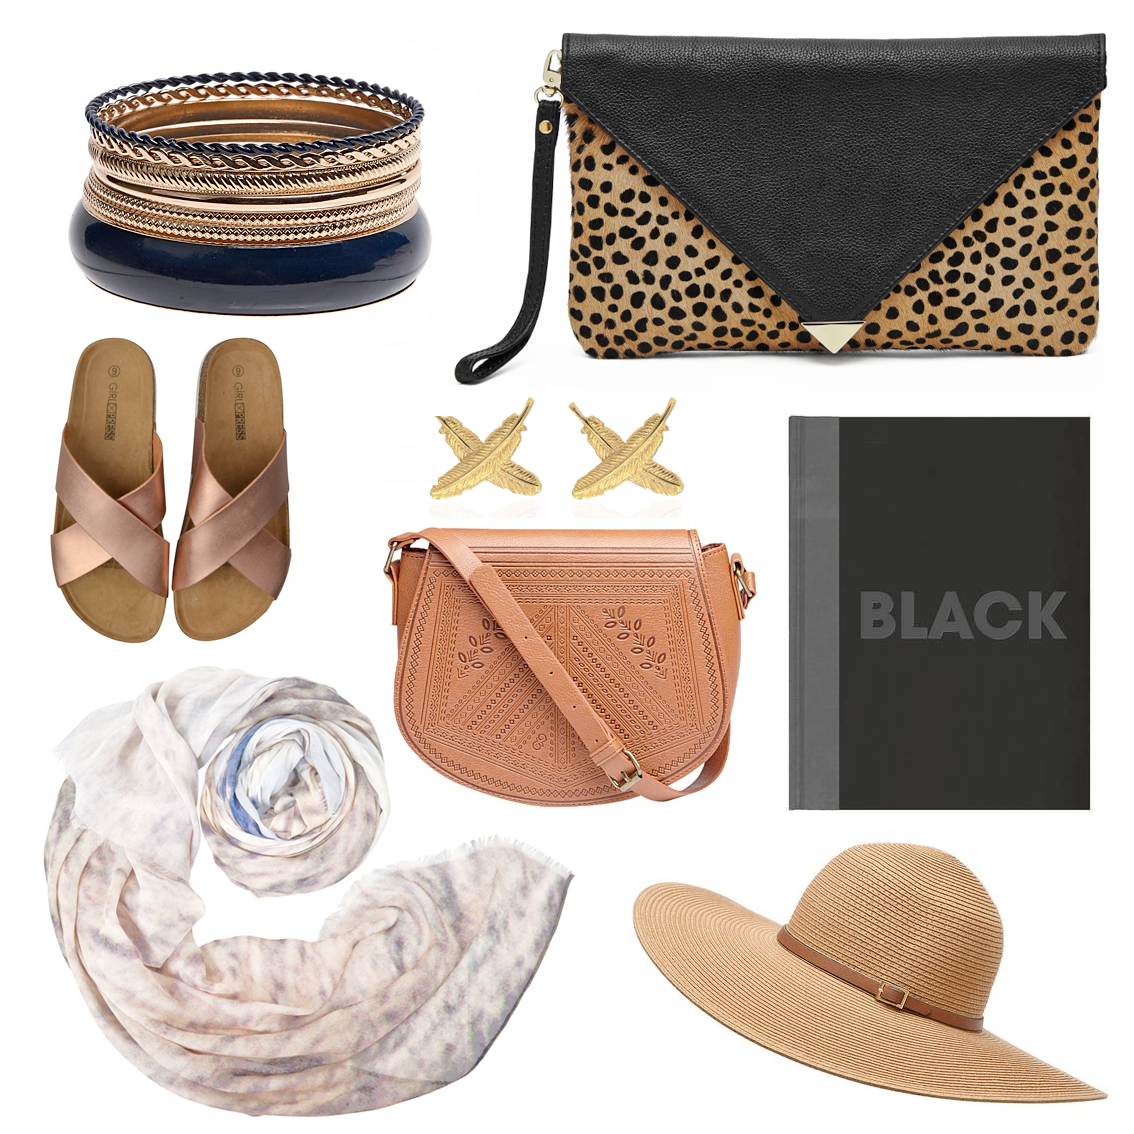 Gift ideas for fashionable babes // Debut Bangle Bracelet Set Gold, $15.00 | Mighty Purse Envelope Clutch, $183.00 | Girl Express Metallic Sandals, $12.00 | Boh Runga 9CT Gold Feather Kisses Studs, $289.00 | Debut Embossed Crossbody Handbag , $25.00 | Black: History of Black in Fashion, Society and Culture in New Zealand, $52.99 | Bird & Knoll Giza Riders Scarf, AUD $298.00 | Witchery Belted Sunhat, $79.90